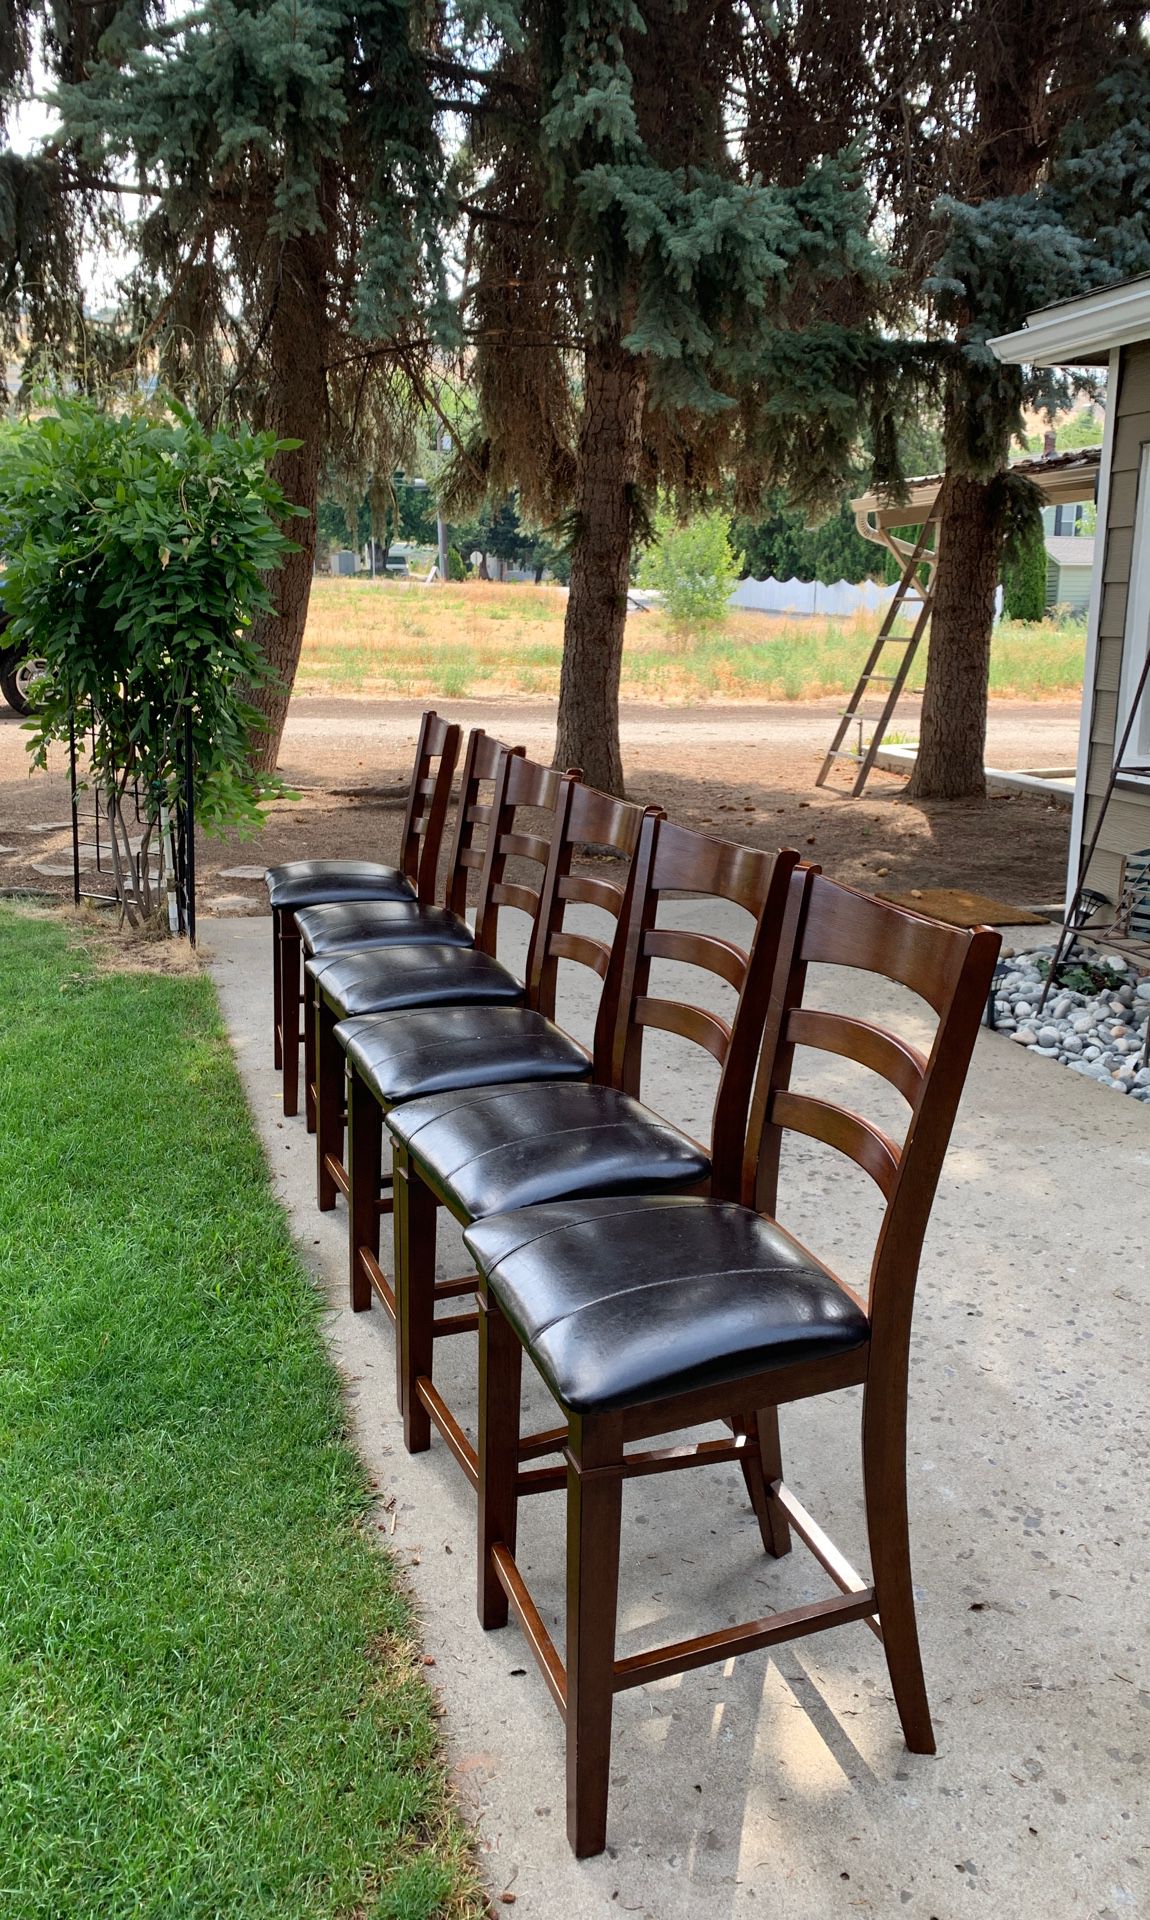 6 bar height chairs.